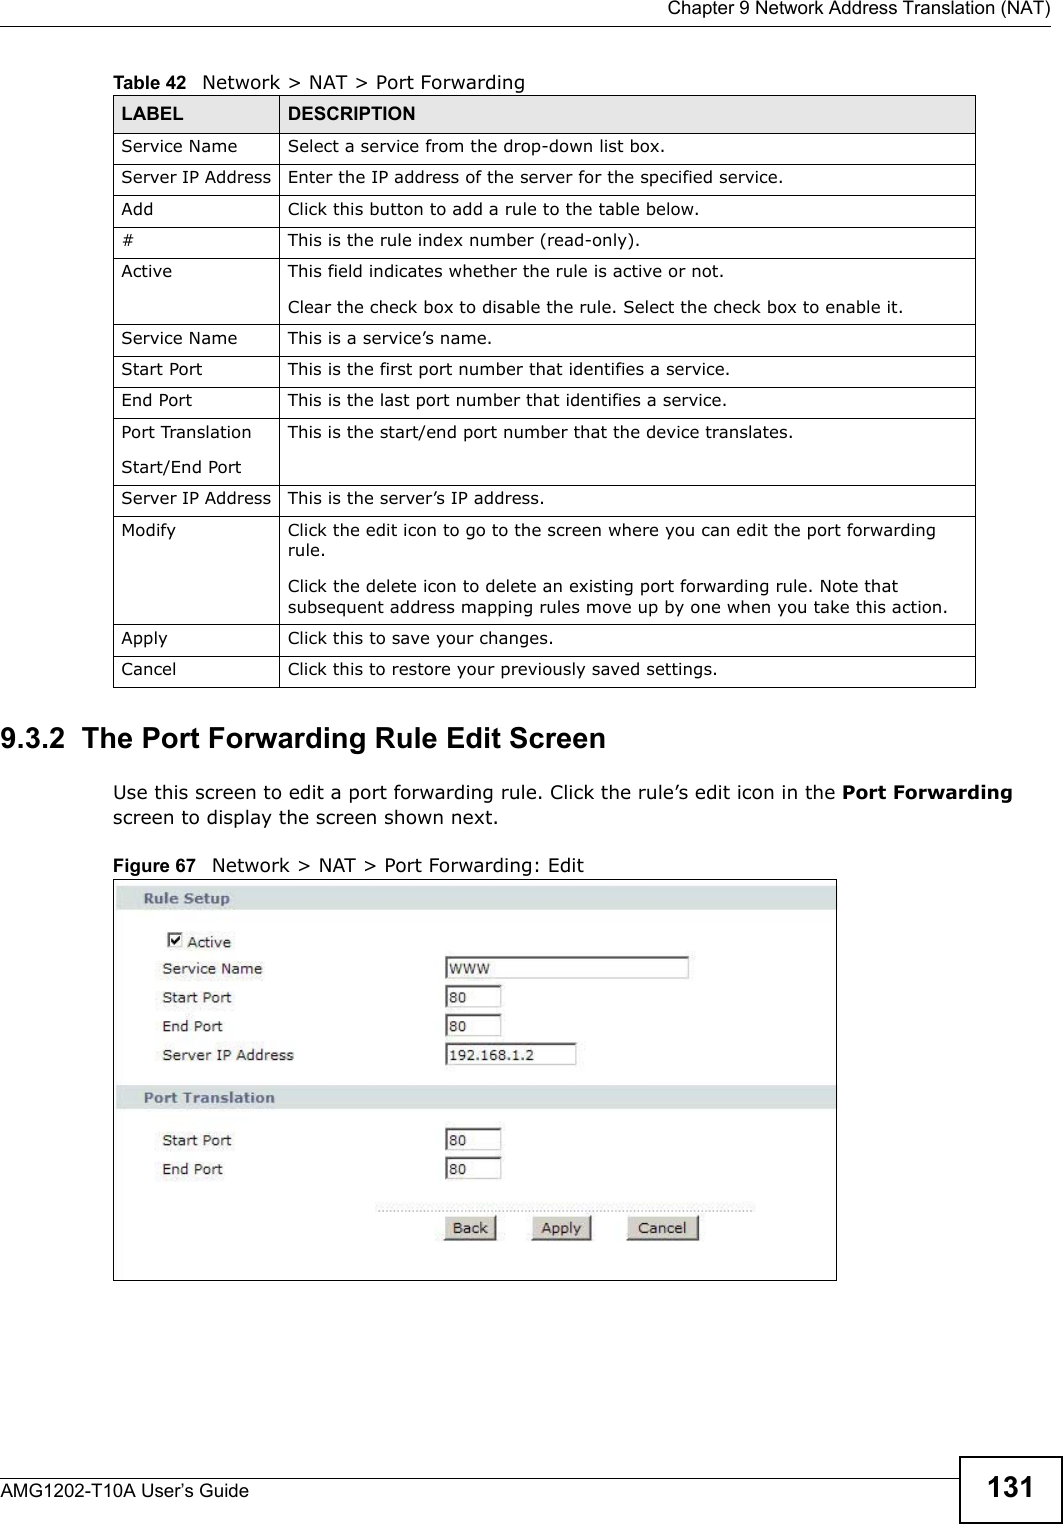  Chapter 9 Network Address Translation (NAT)AMG1202-T10A User’s Guide 1319.3.2  The Port Forwarding Rule Edit ScreenUse this screen to edit a port forwarding rule. Click the rule’s edit icon in the Port Forwarding screen to display the screen shown next.Figure 67   Network &gt; NAT &gt; Port Forwarding: Edit Service Name Select a service from the drop-down list box.Server IP Address Enter the IP address of the server for the specified service.Add Click this button to add a rule to the table below.#This is the rule index number (read-only).Active This field indicates whether the rule is active or not.Clear the check box to disable the rule. Select the check box to enable it.Service Name This is a service’s name.Start Port  This is the first port number that identifies a service.End Port  This is the last port number that identifies a service.Port TranslationStart/End PortThis is the start/end port number that the device translates.Server IP Address This is the server’s IP address.Modify Click the edit icon to go to the screen where you can edit the port forwarding rule.Click the delete icon to delete an existing port forwarding rule. Note that subsequent address mapping rules move up by one when you take this action.Apply Click this to save your changes.Cancel Click this to restore your previously saved settings.Table 42   Network &gt; NAT &gt; Port ForwardingLABEL DESCRIPTION